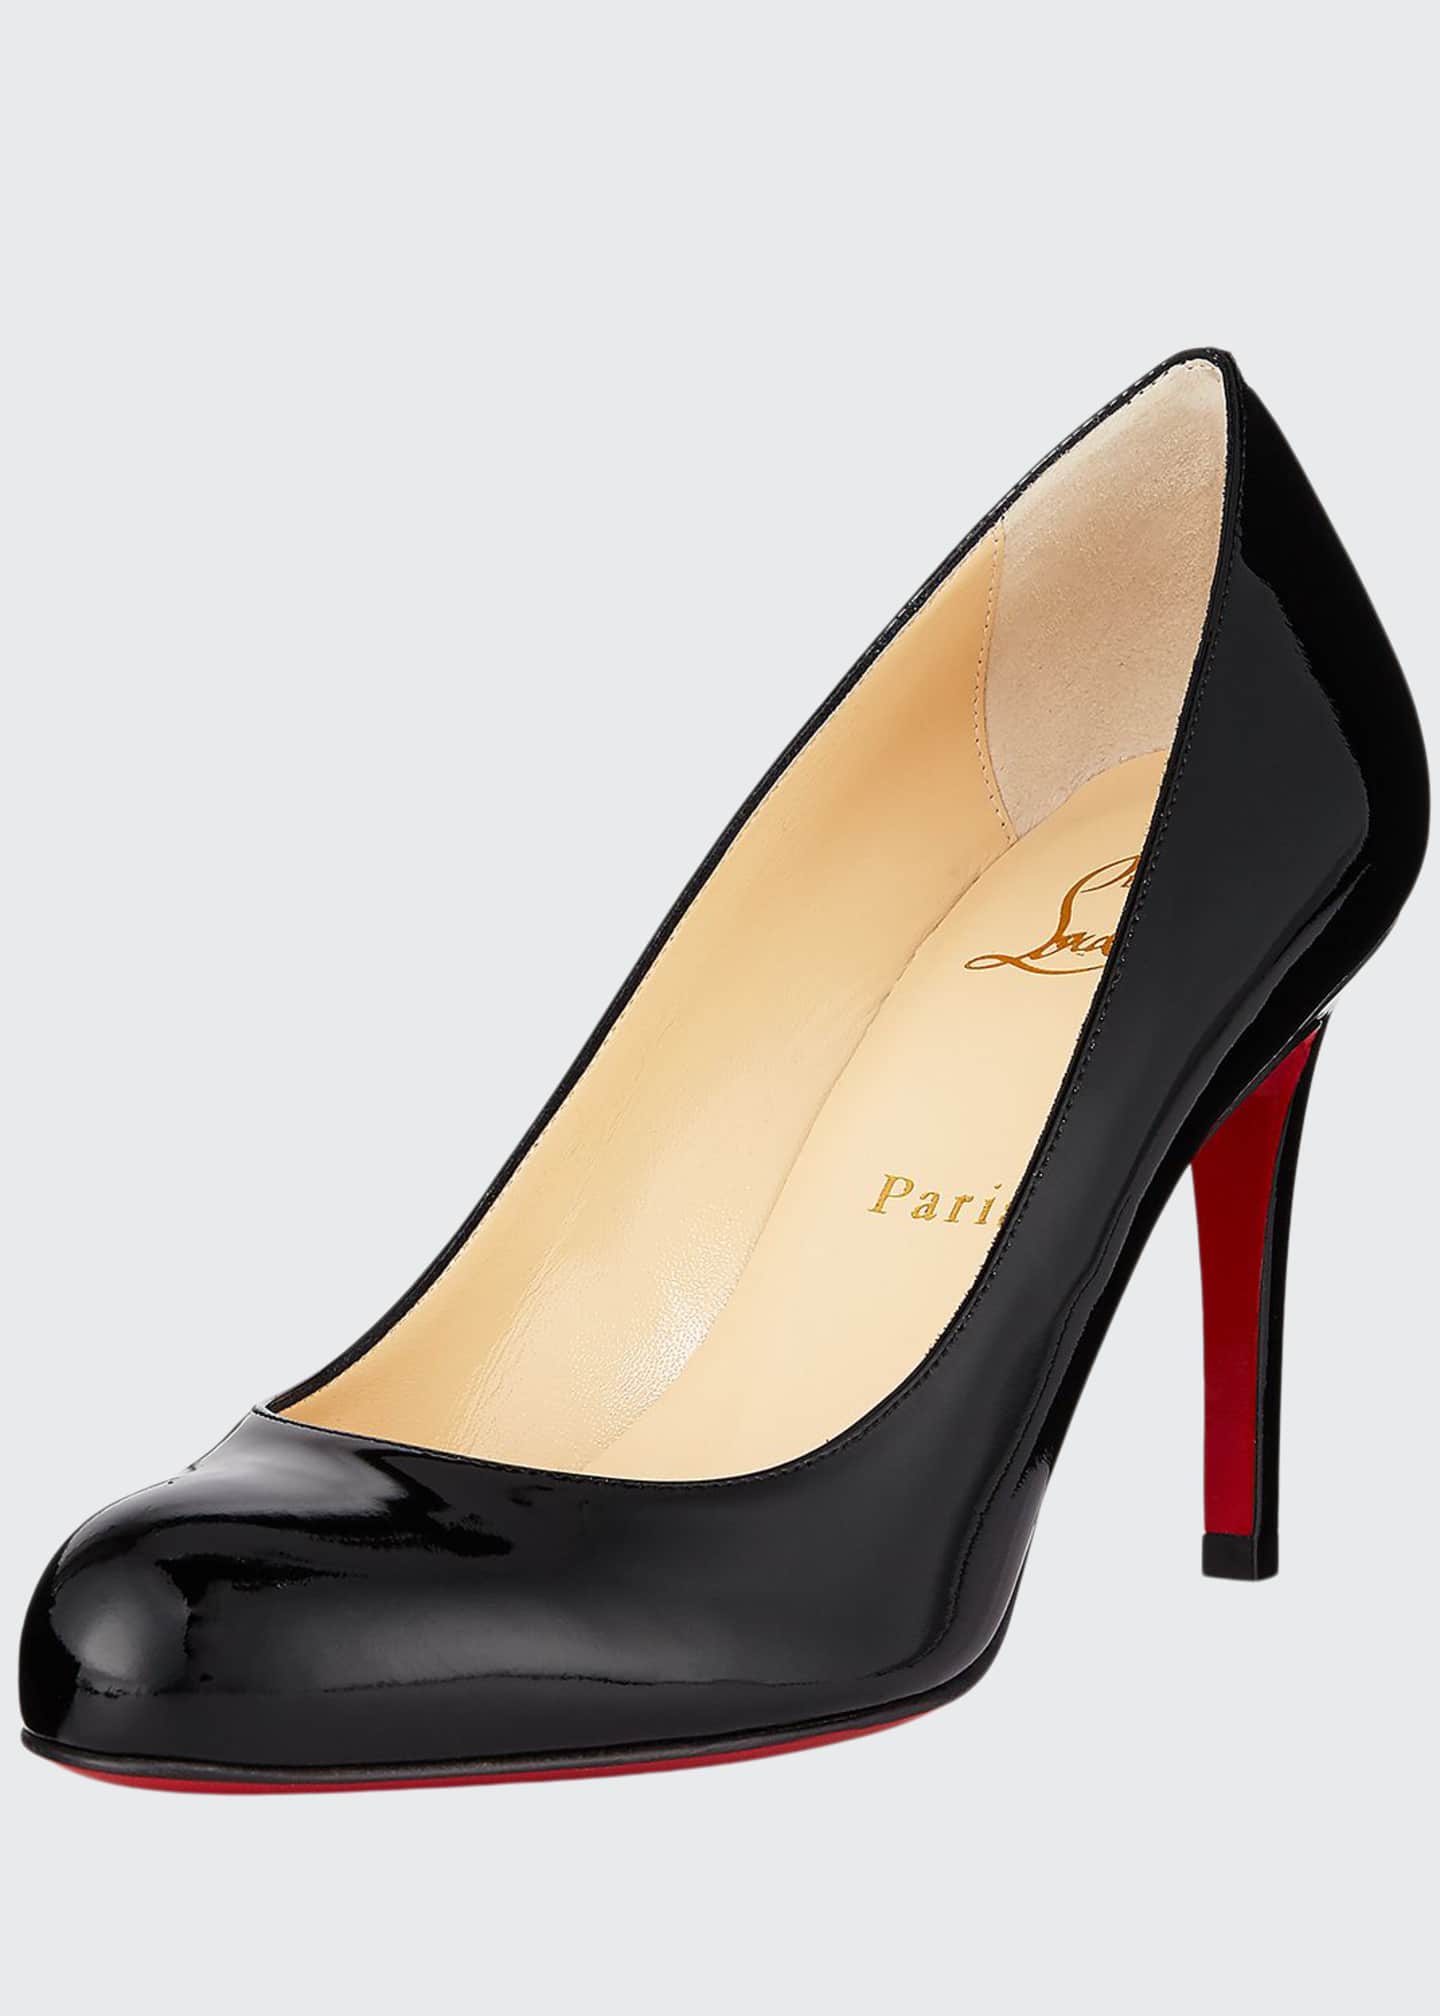 Christian Louboutin Simple Patent 85mm Red Sole Pumps - Bergdorf Goodman